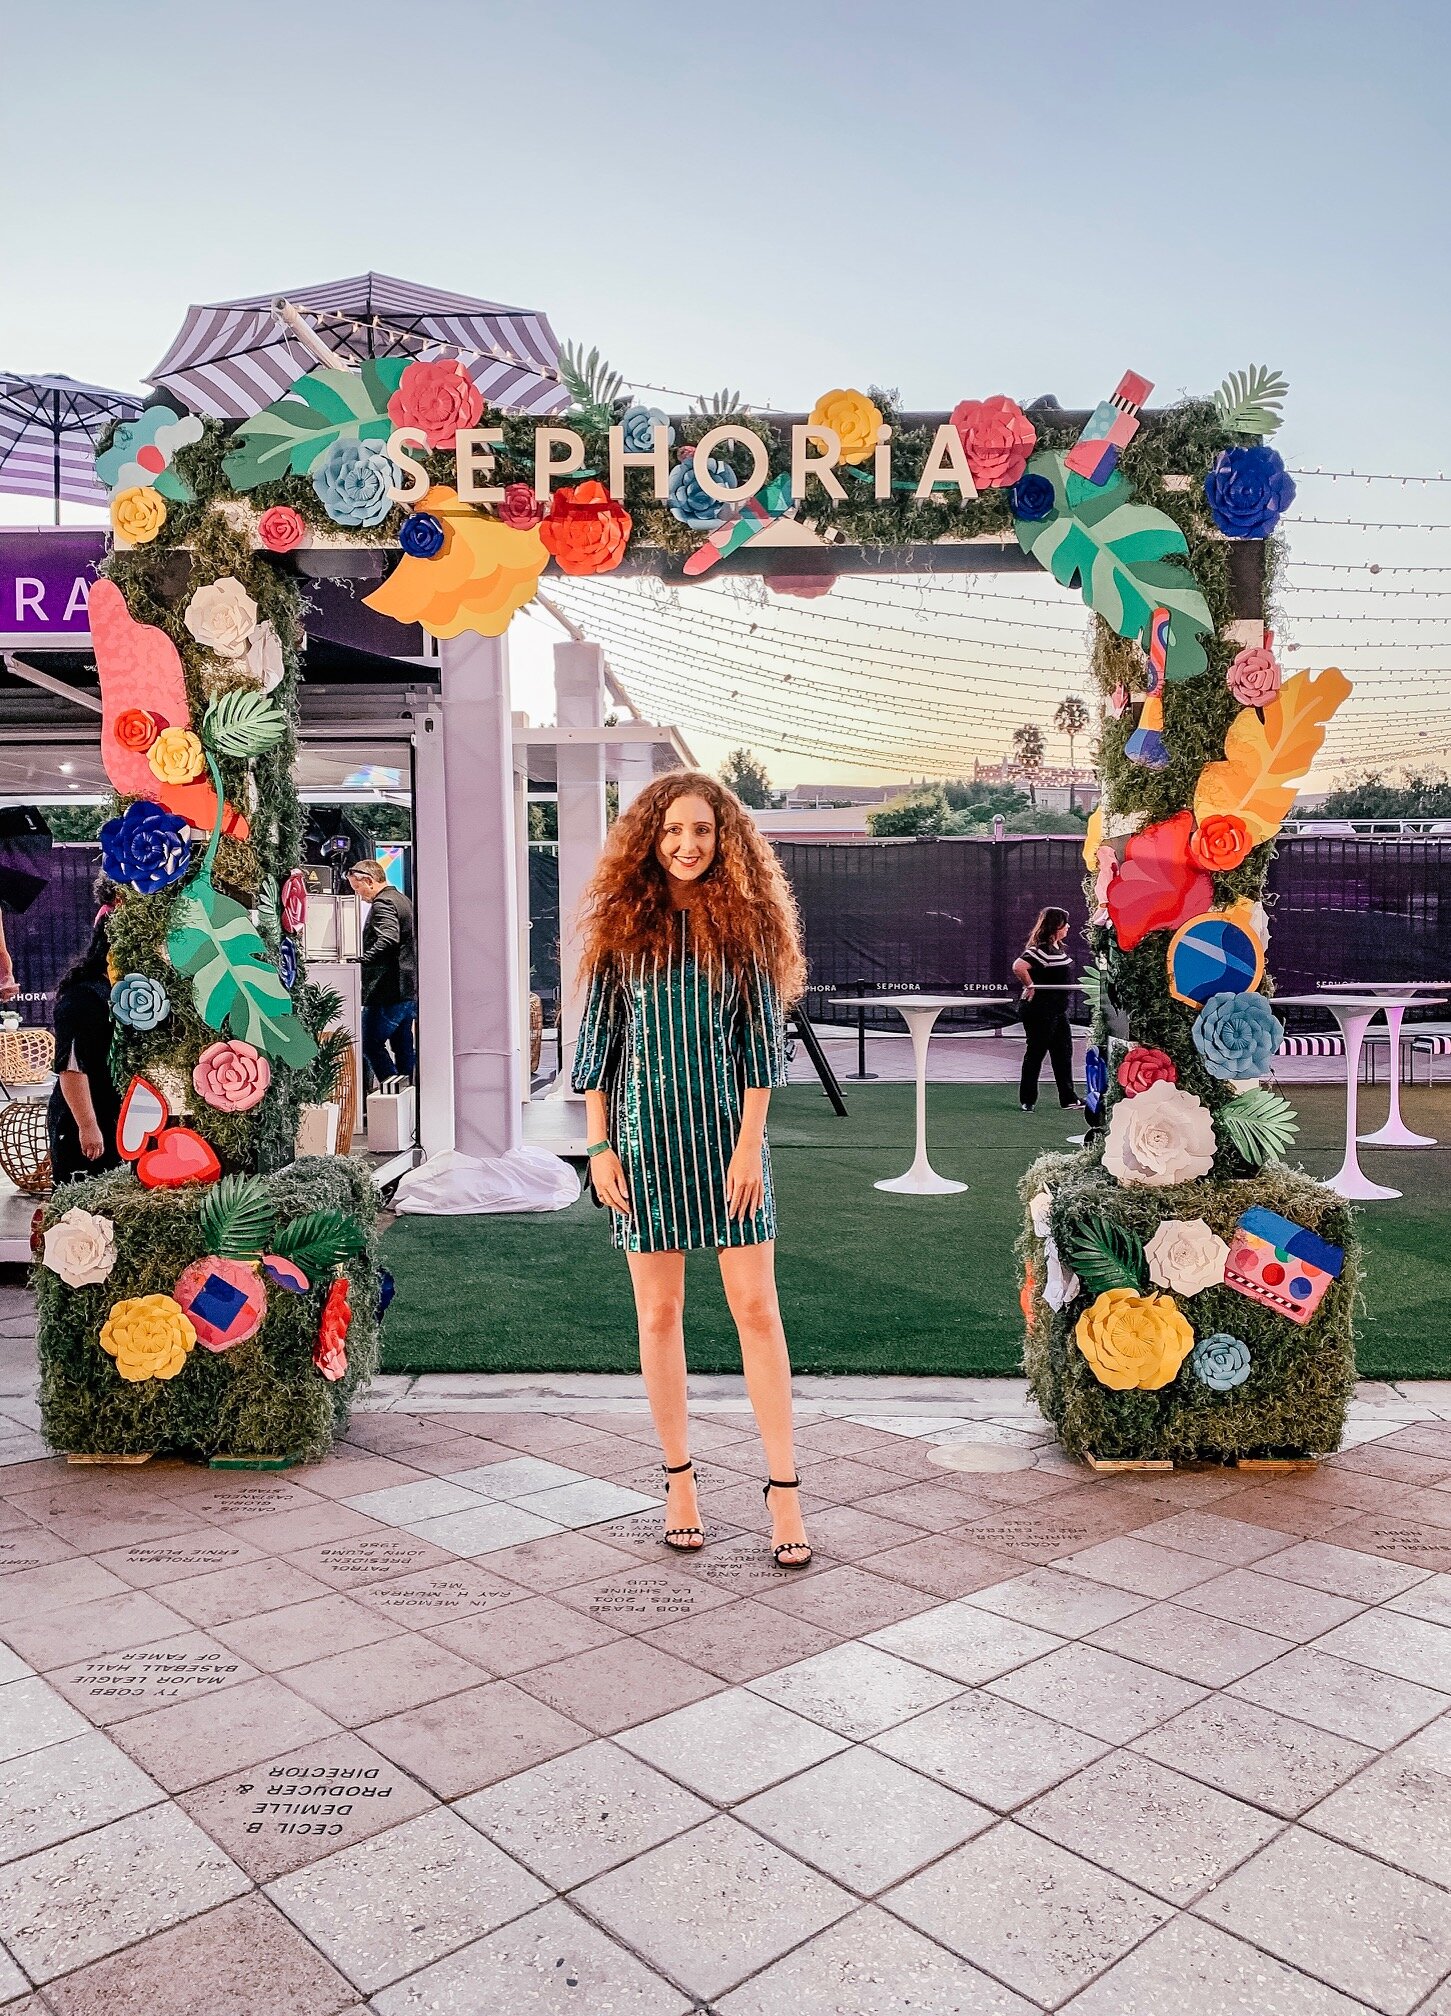 Quickly find out the BEST 10 Sephora Favorites holiday gift sets from the NEW 2022 Sephora Holiday Gift Sets range from a #SephoraSquad influencer. Sephora have just launched 2022 holiday gift sets